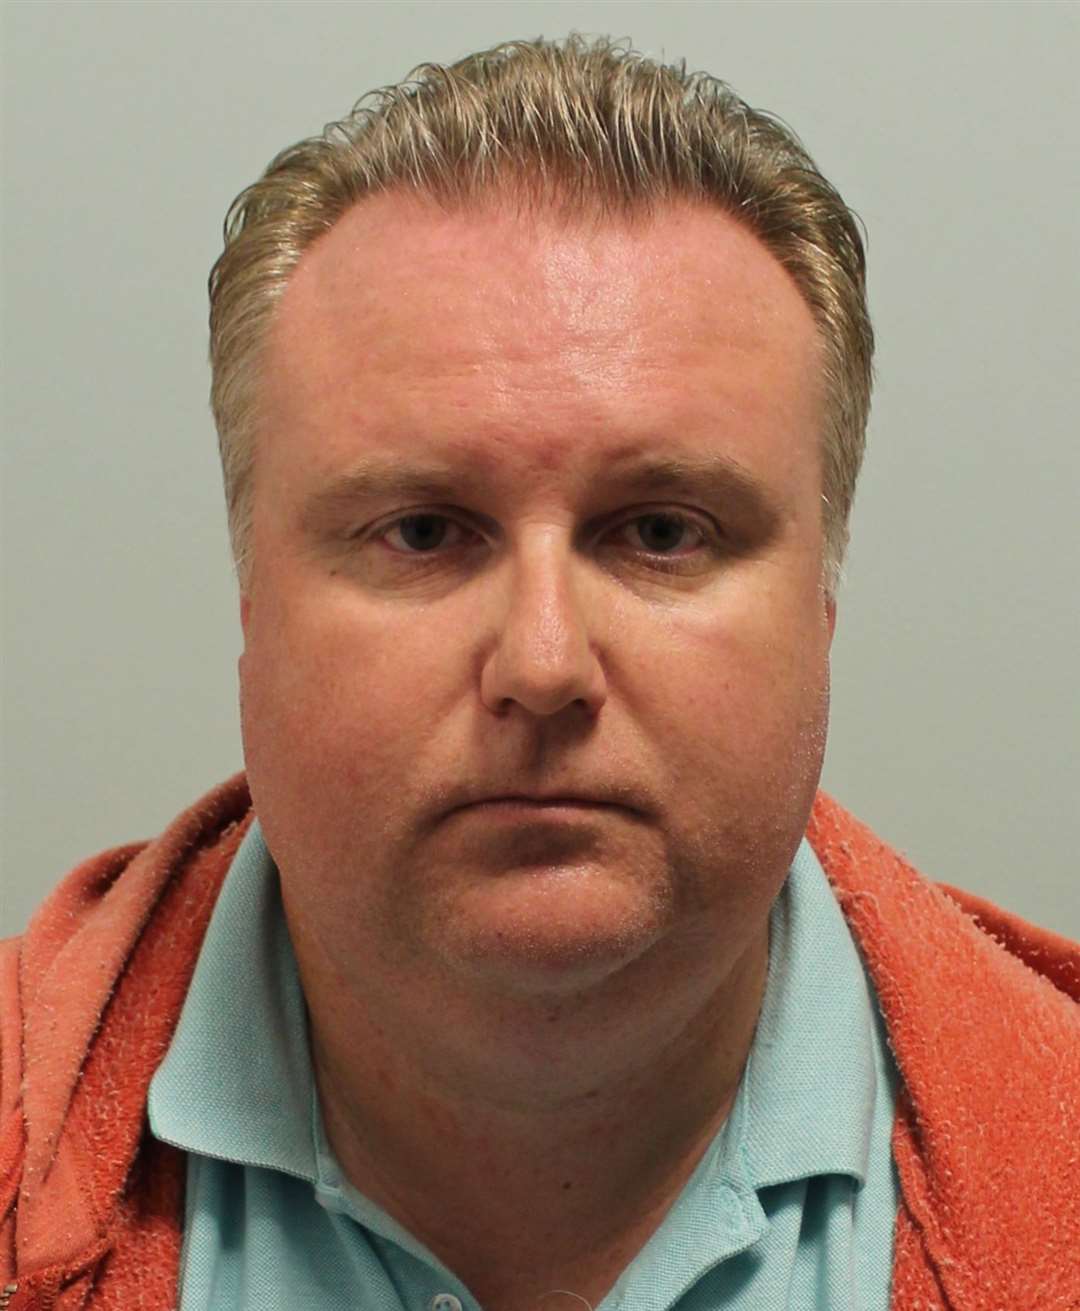 Matthew Bower was jailed for 13 years. Picture: National Crime Agency